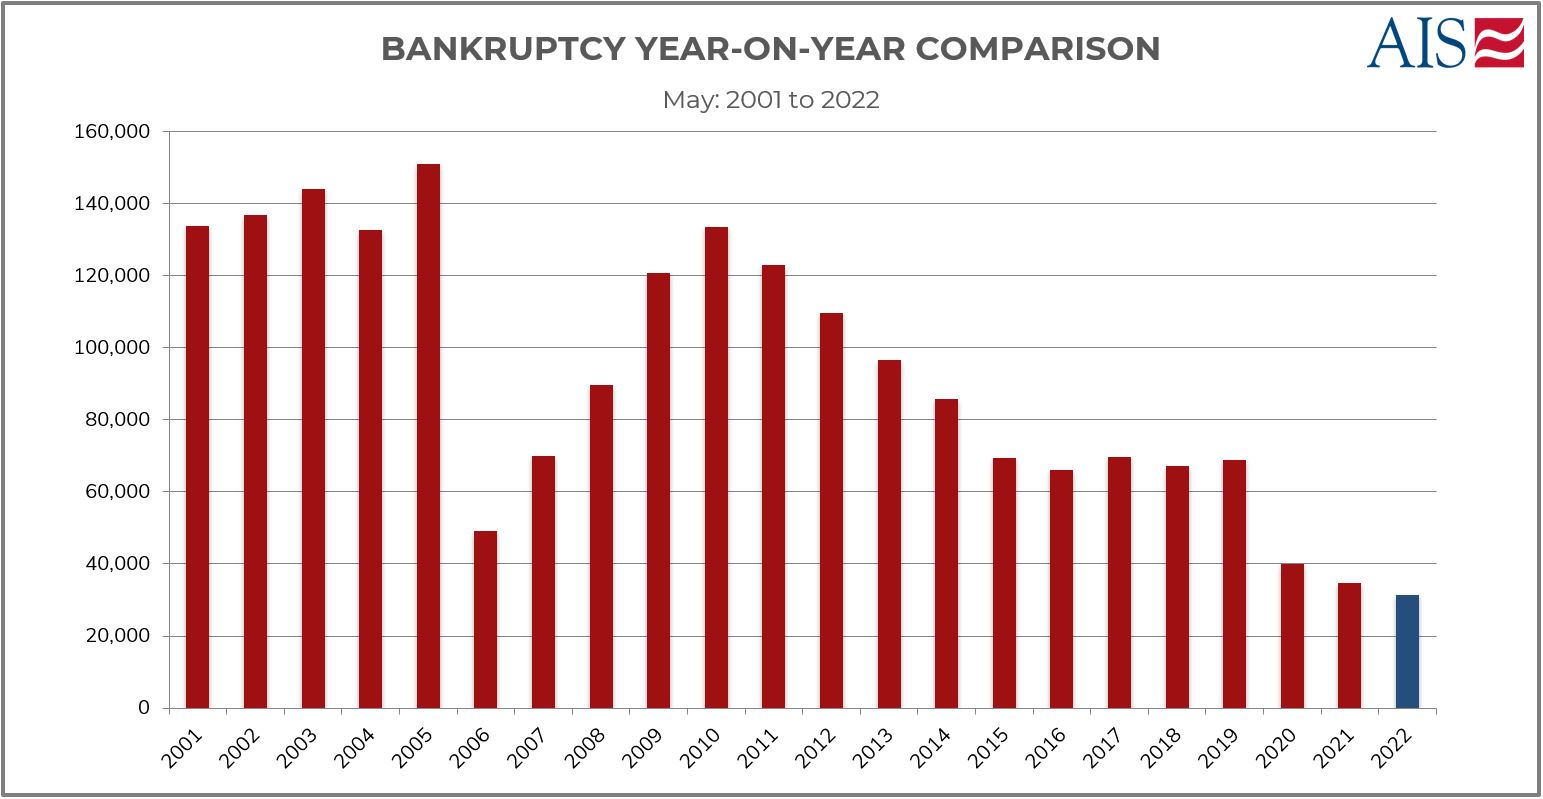 AIS Insight_May 2022_BANKRUPTCY YEAR ON YEAR COMPARISON-1